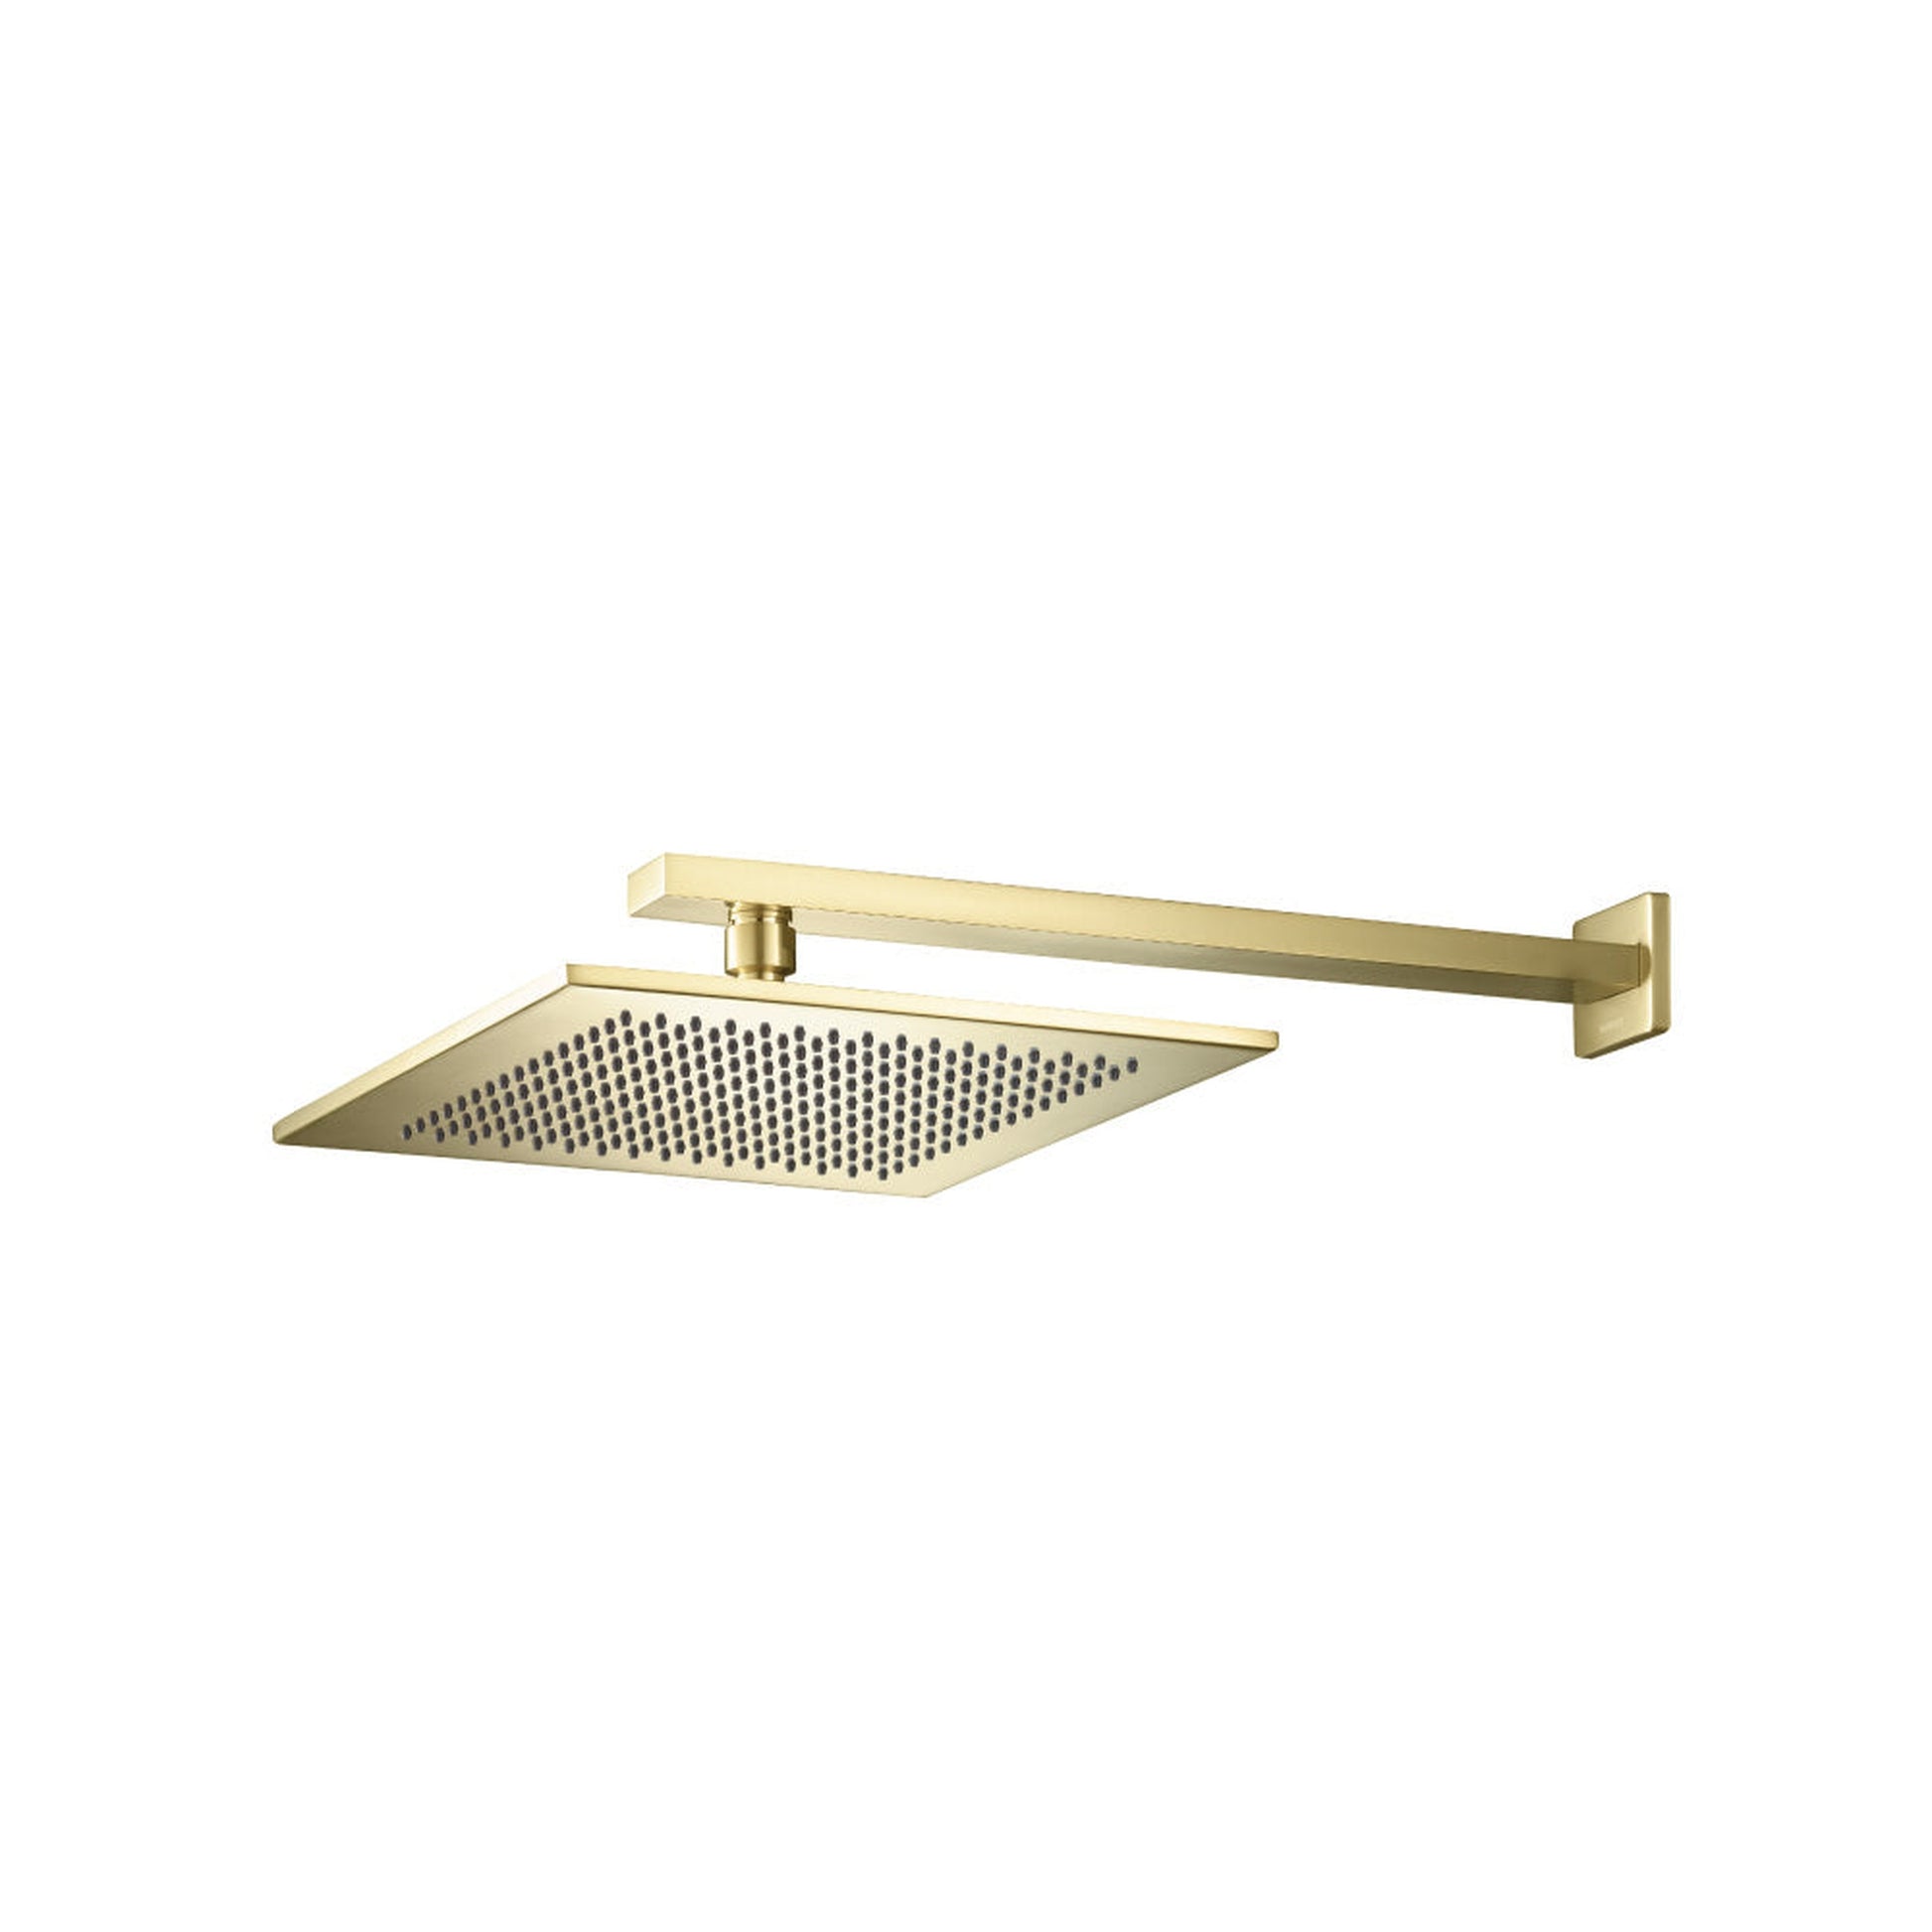 Isenberg Universal Fixtures 10" Single Function Square Satin Brass PVD Solid Brass Rain Shower Head With 15" Wall Mounted Shower Arm